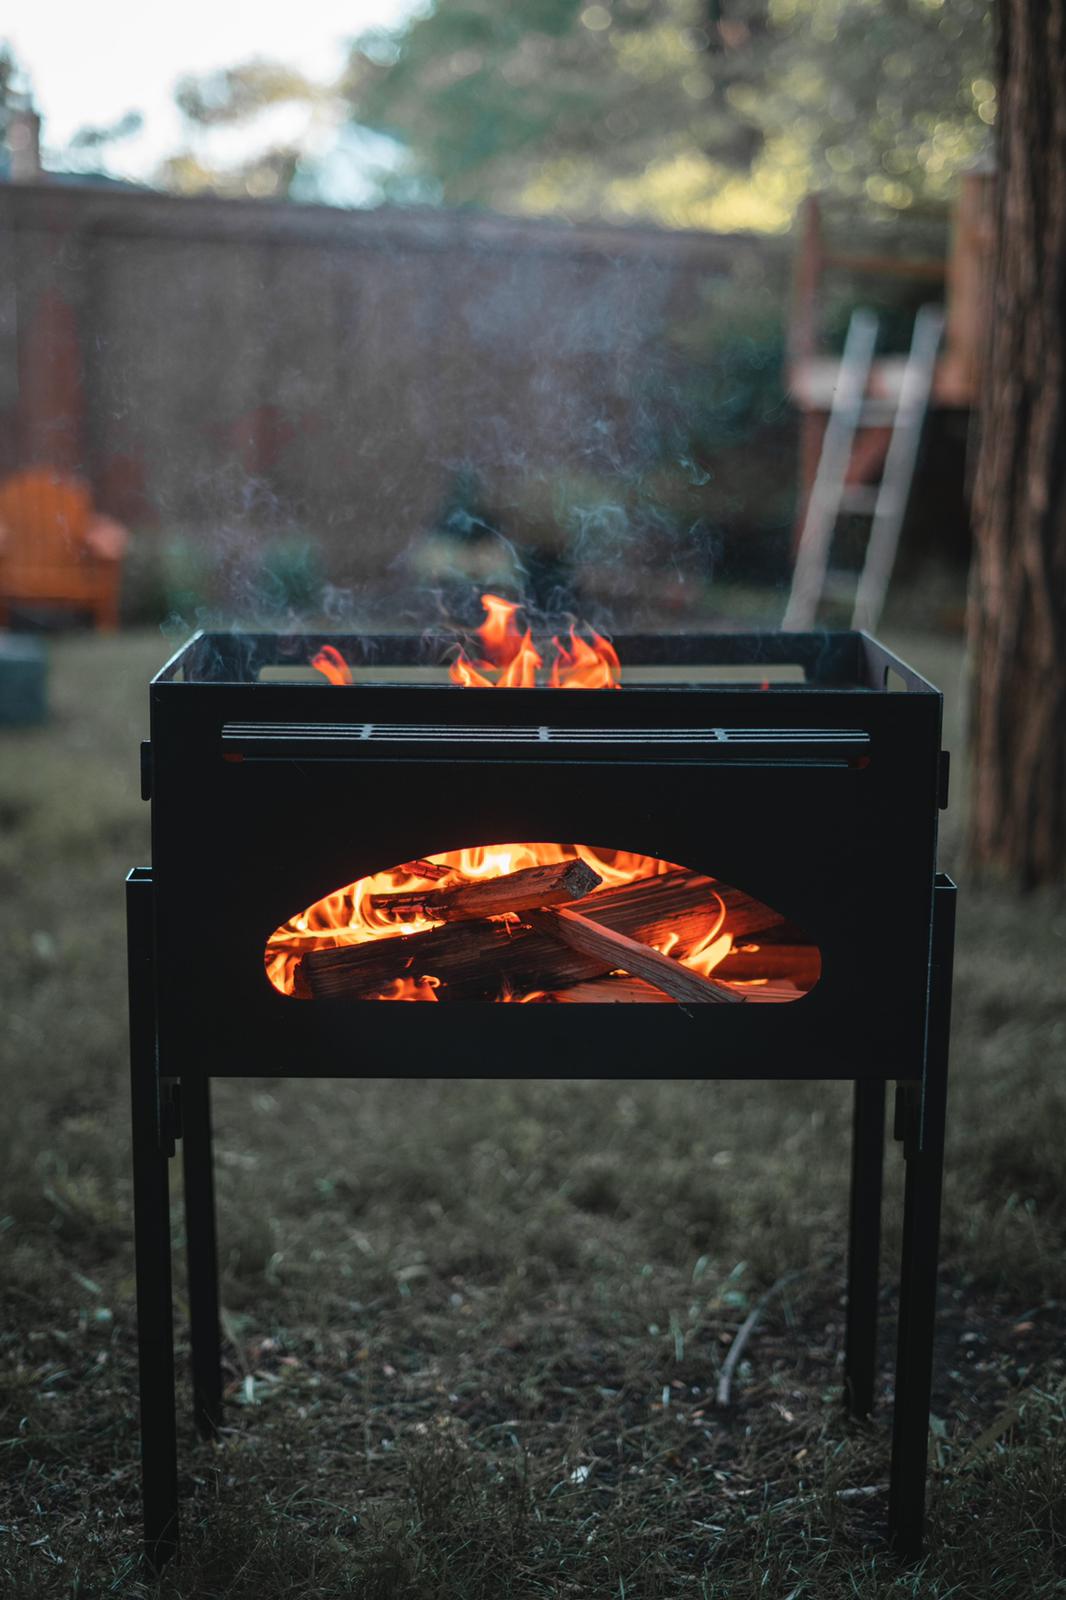 The roam is ready for whatever way you want to grill or cook.